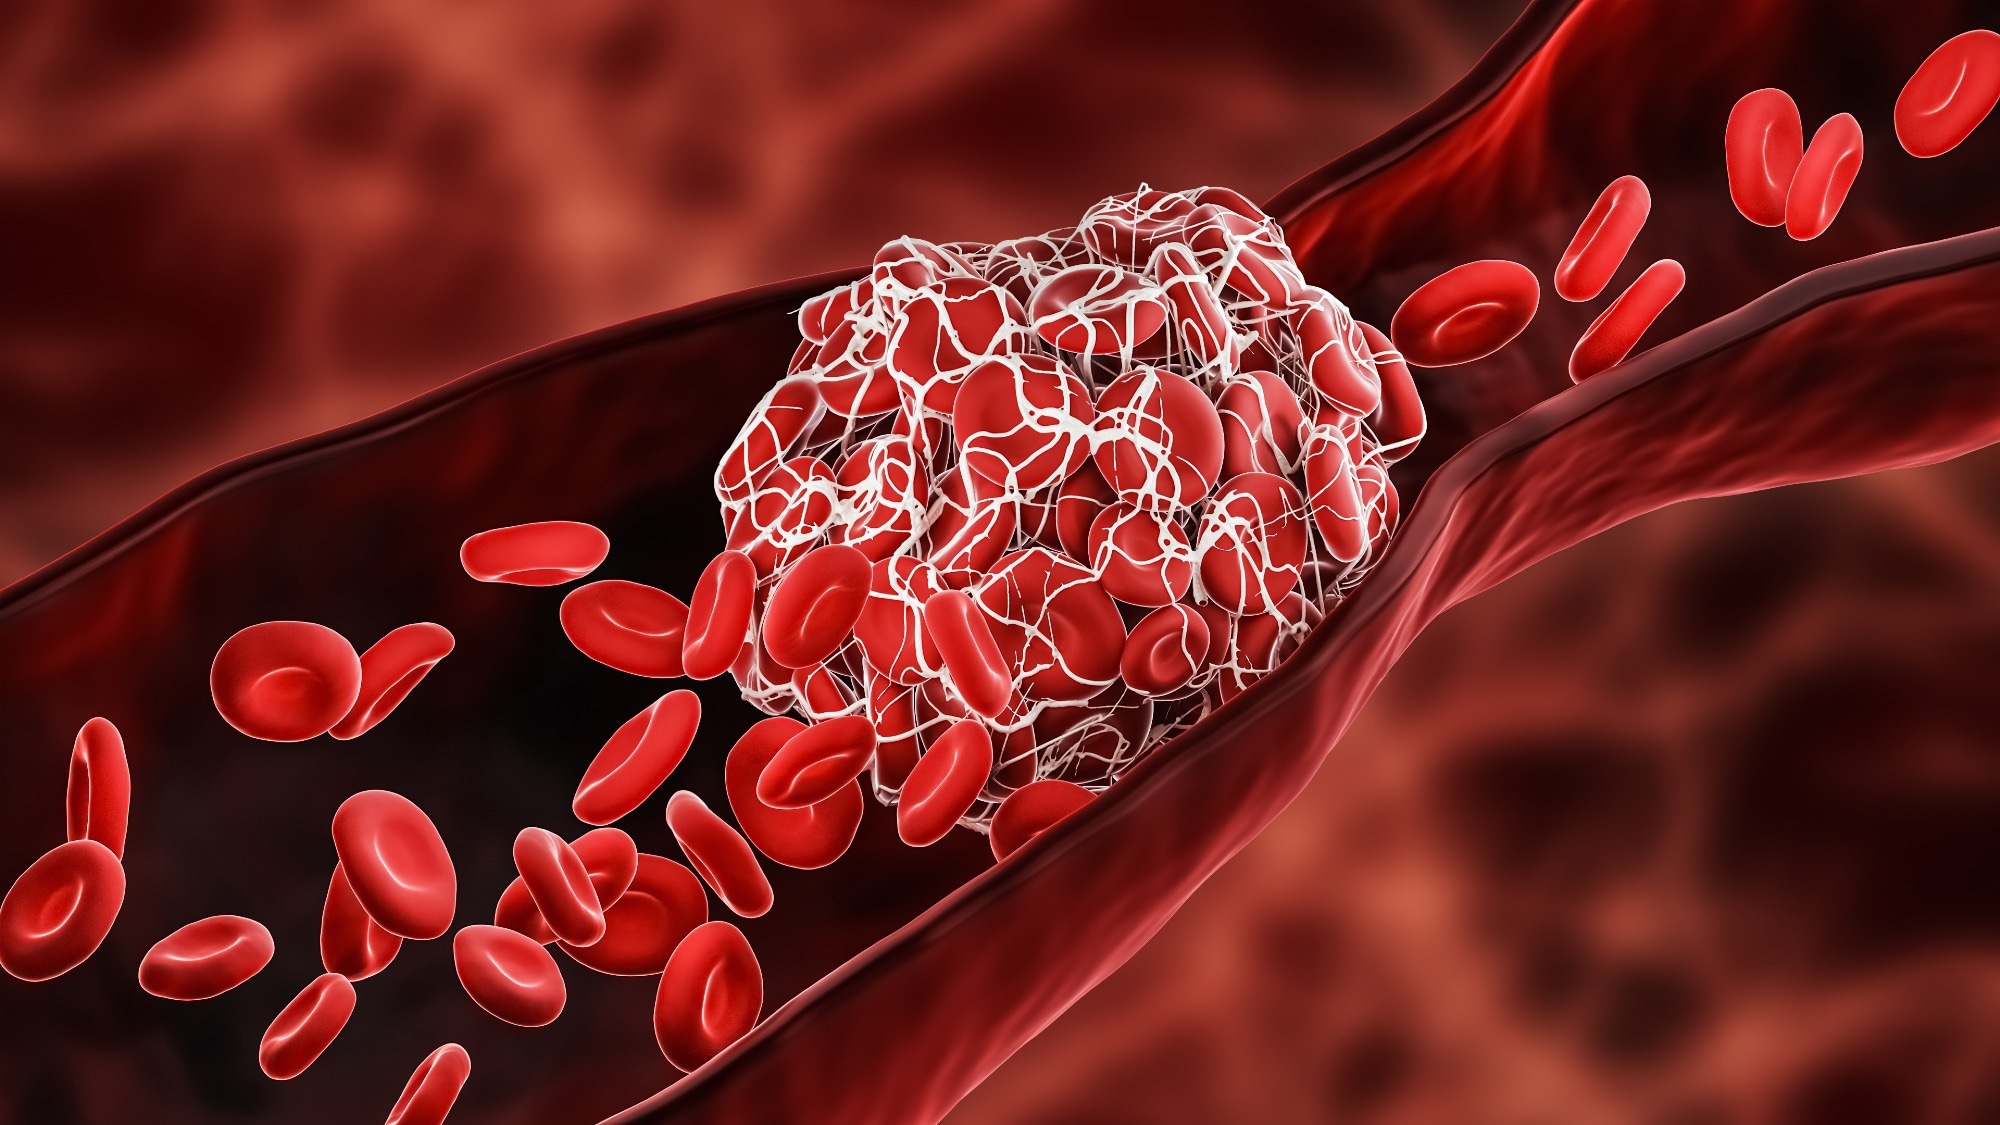 Study: The potential impact of nanomedicine on COVID-19-induced thrombosis. Image Credit: MattLphotography/Shutterstock